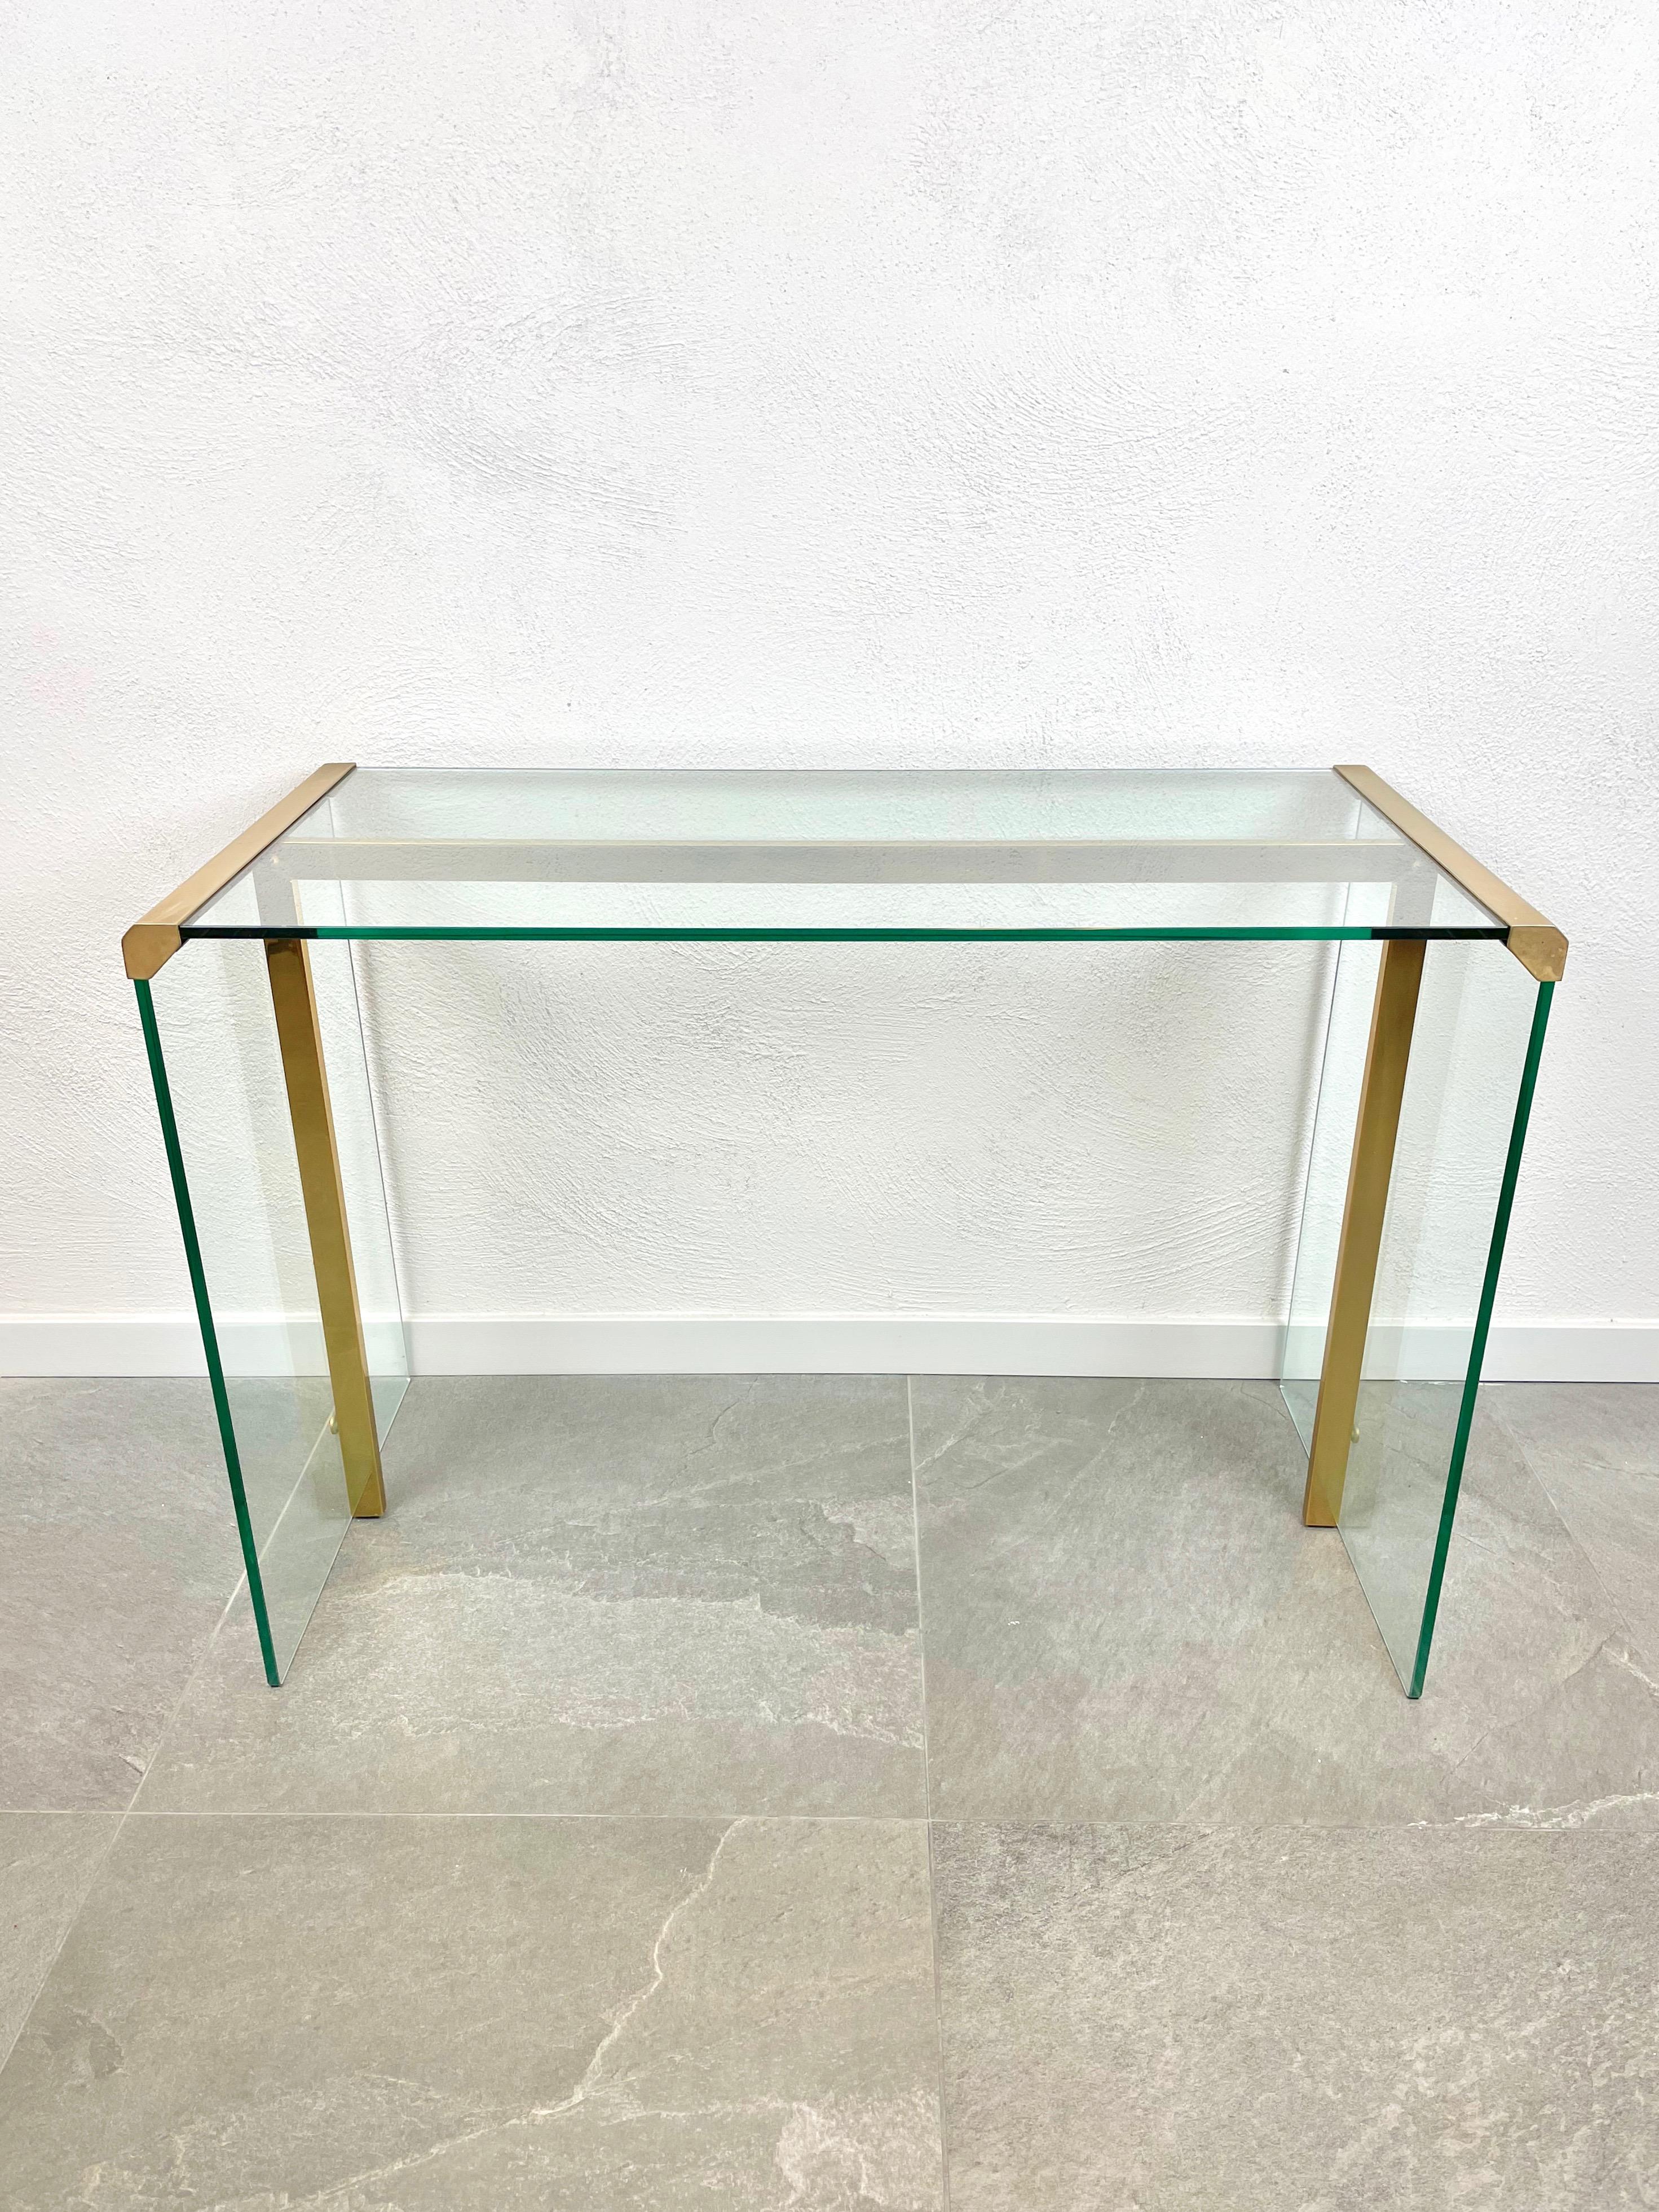 1970s Italian console table in glass and brass details by Gallotti & Radice.